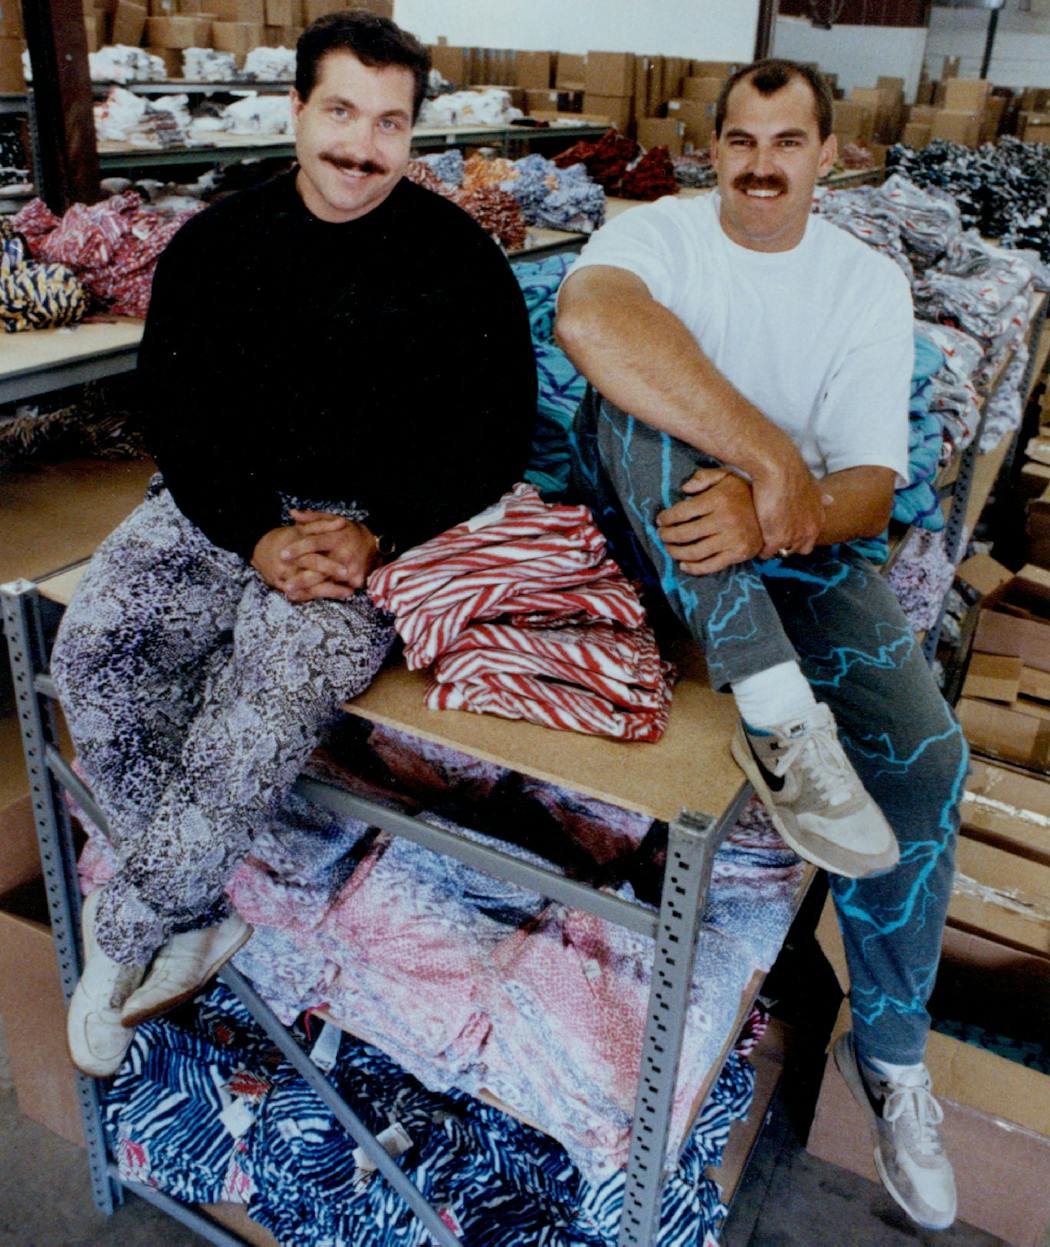 Bob Truax and Dan Stock sat atop a rack of Zubaz in a Roseville warehouse in 1991.